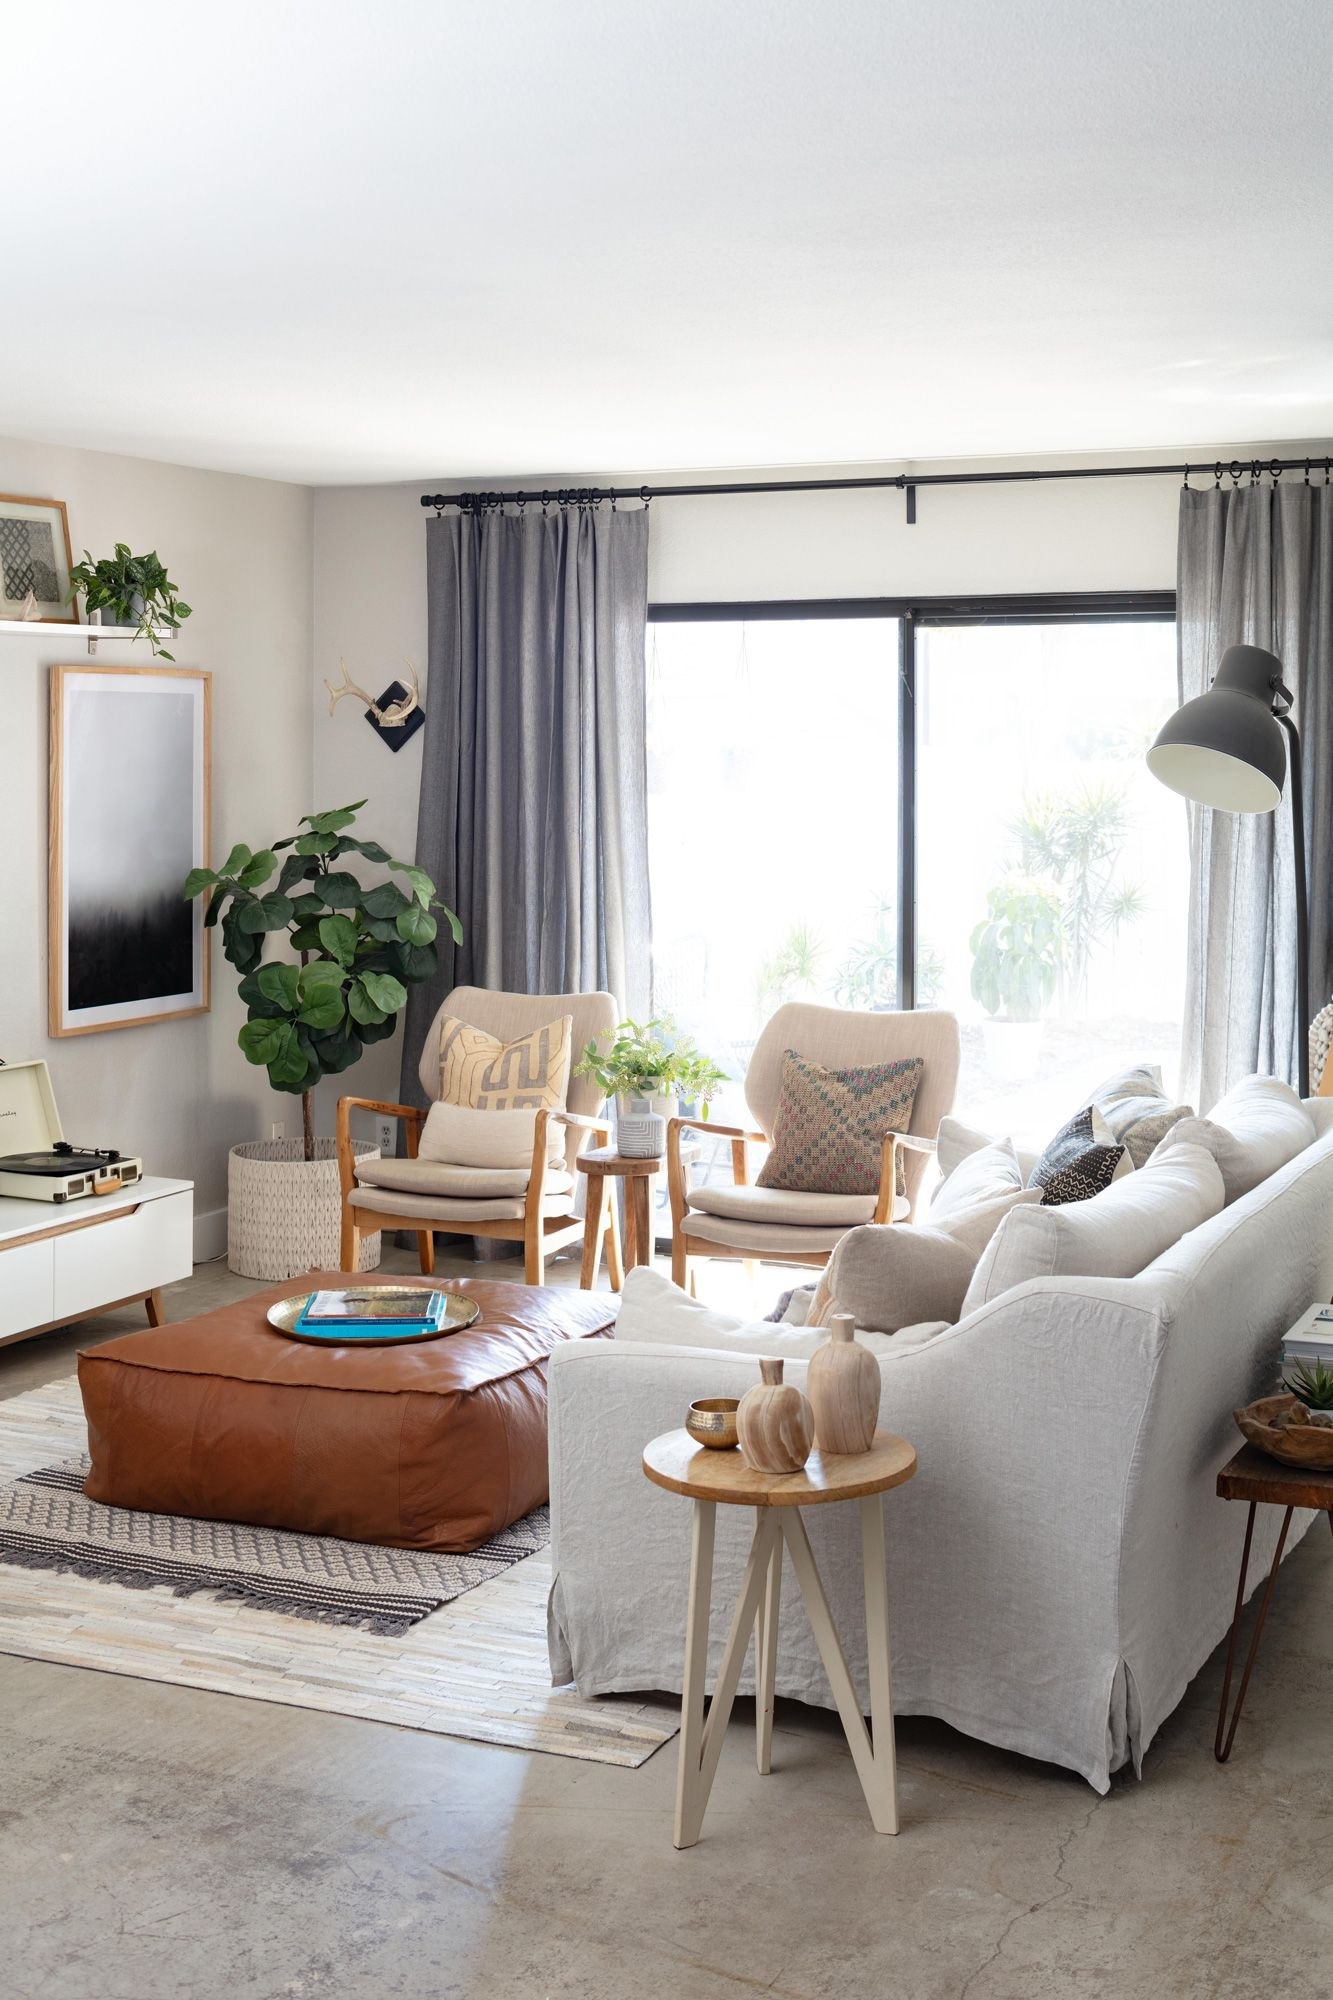 20 Living Room Furniture Layouts That Make The Most Of Your Space inside Living Room Set Up